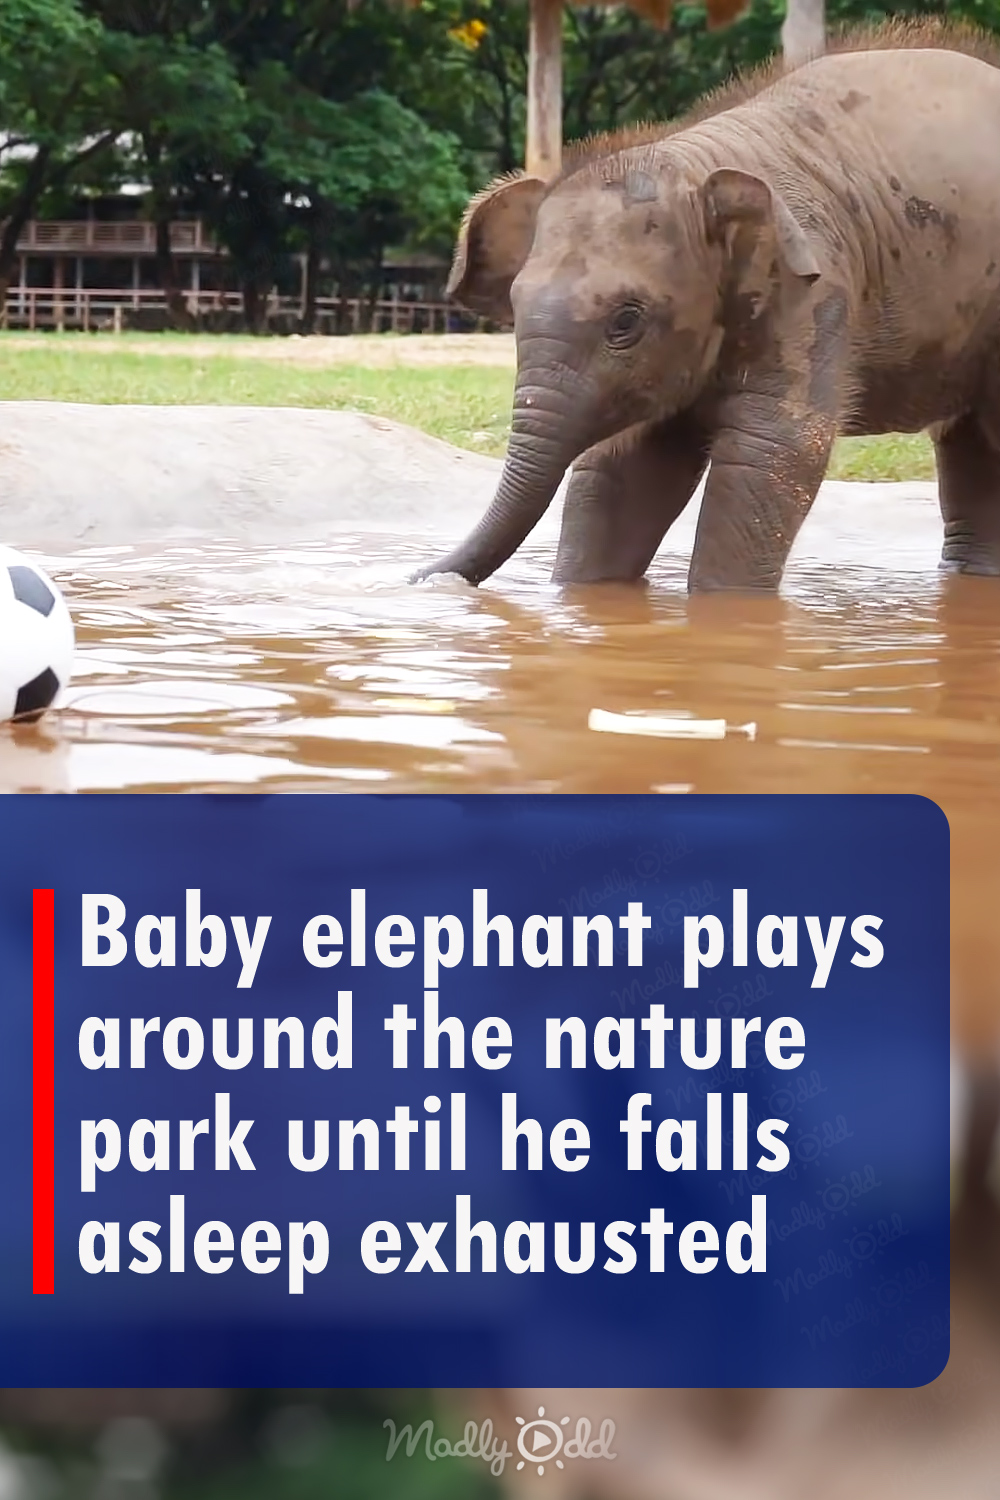 Baby elephant plays around the nature park until he falls asleep exhausted